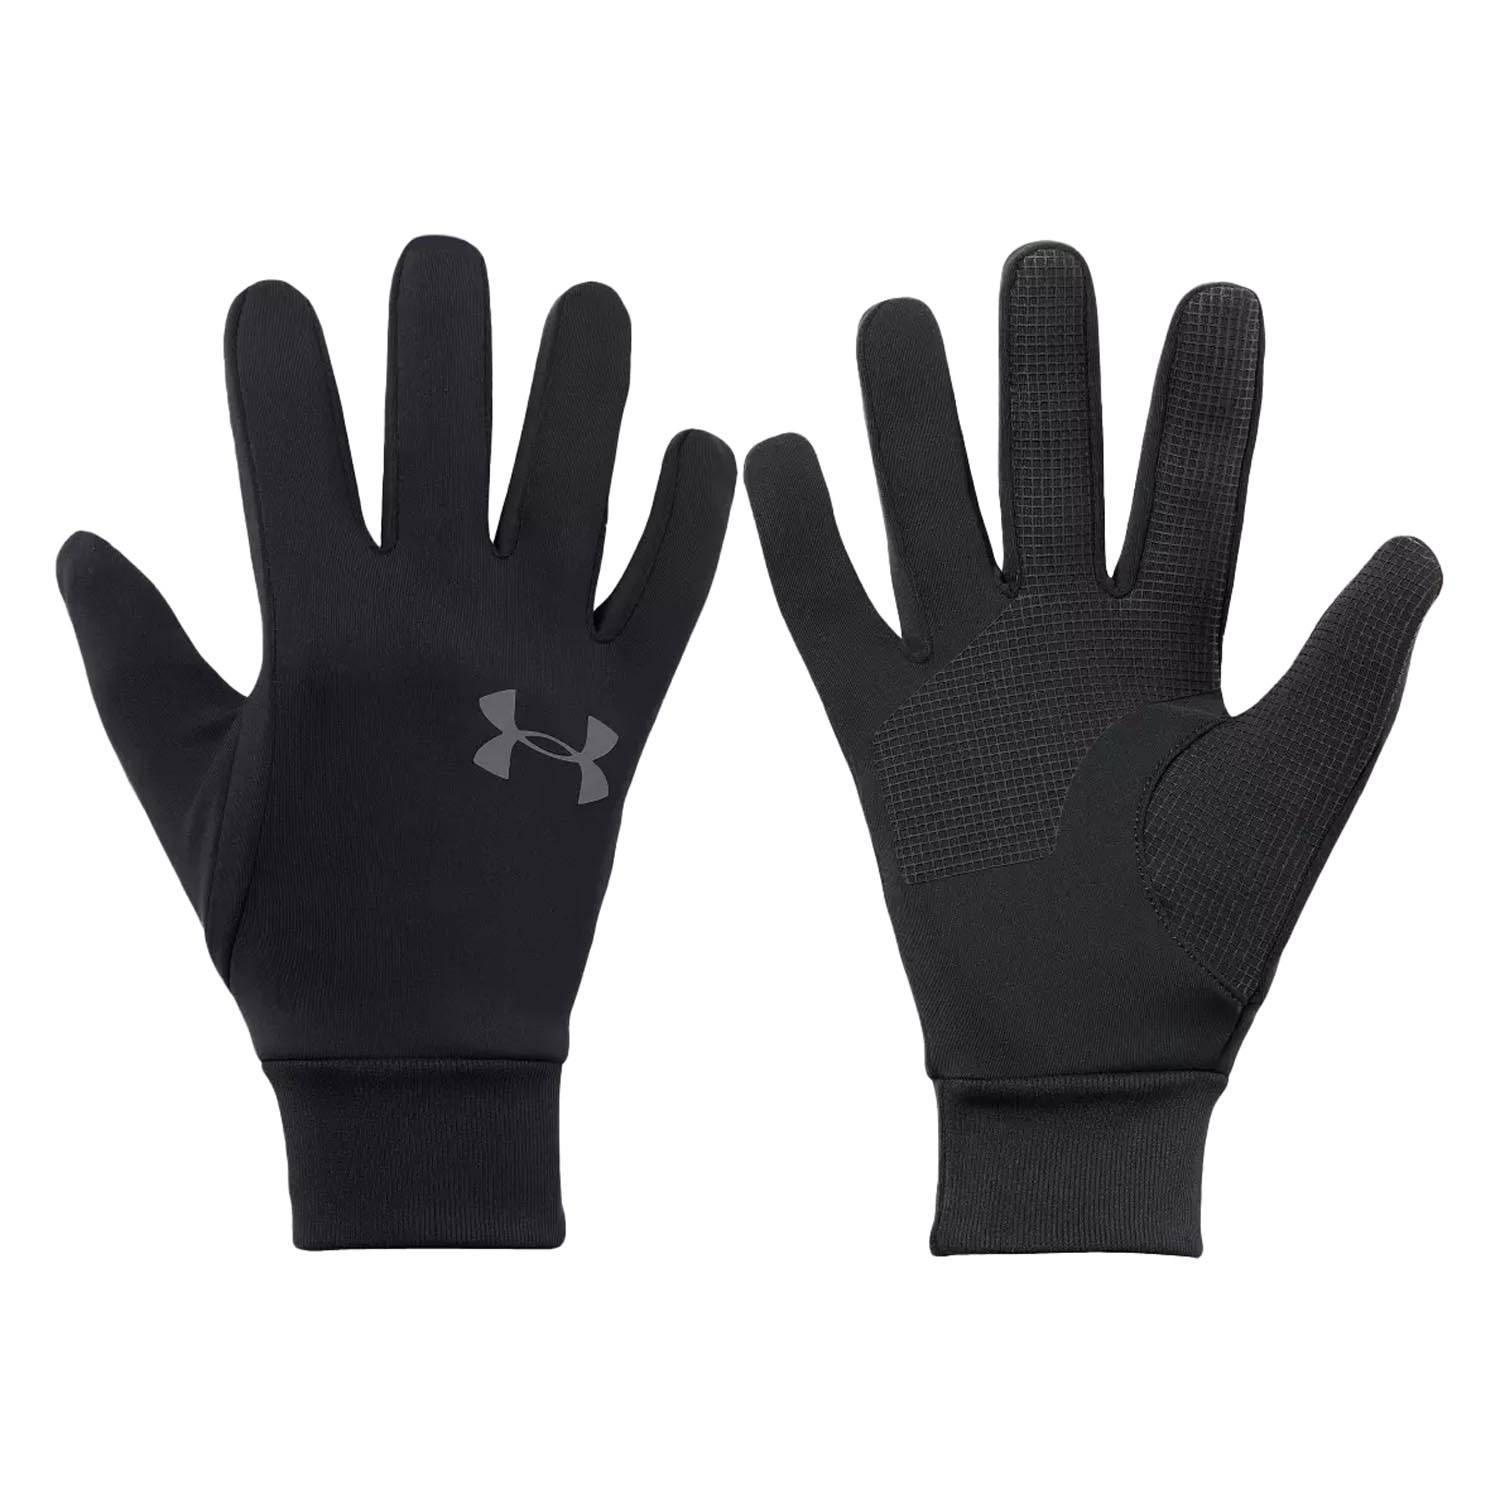 Under Armour Men's Armour Liner 2.0 Gloves